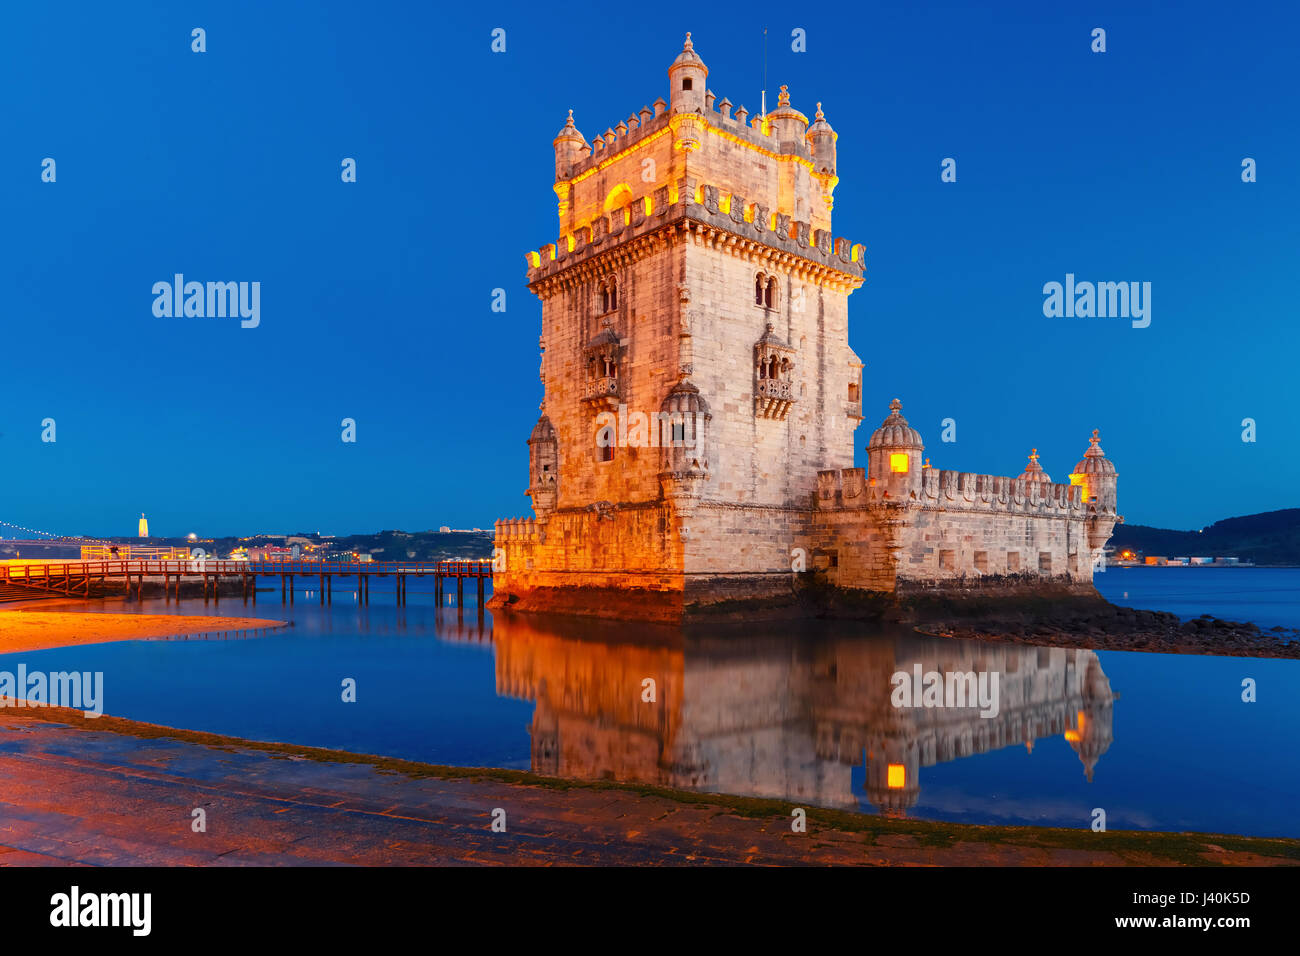 Belem Tower in Lisbon at night, Portugal Stock Photo